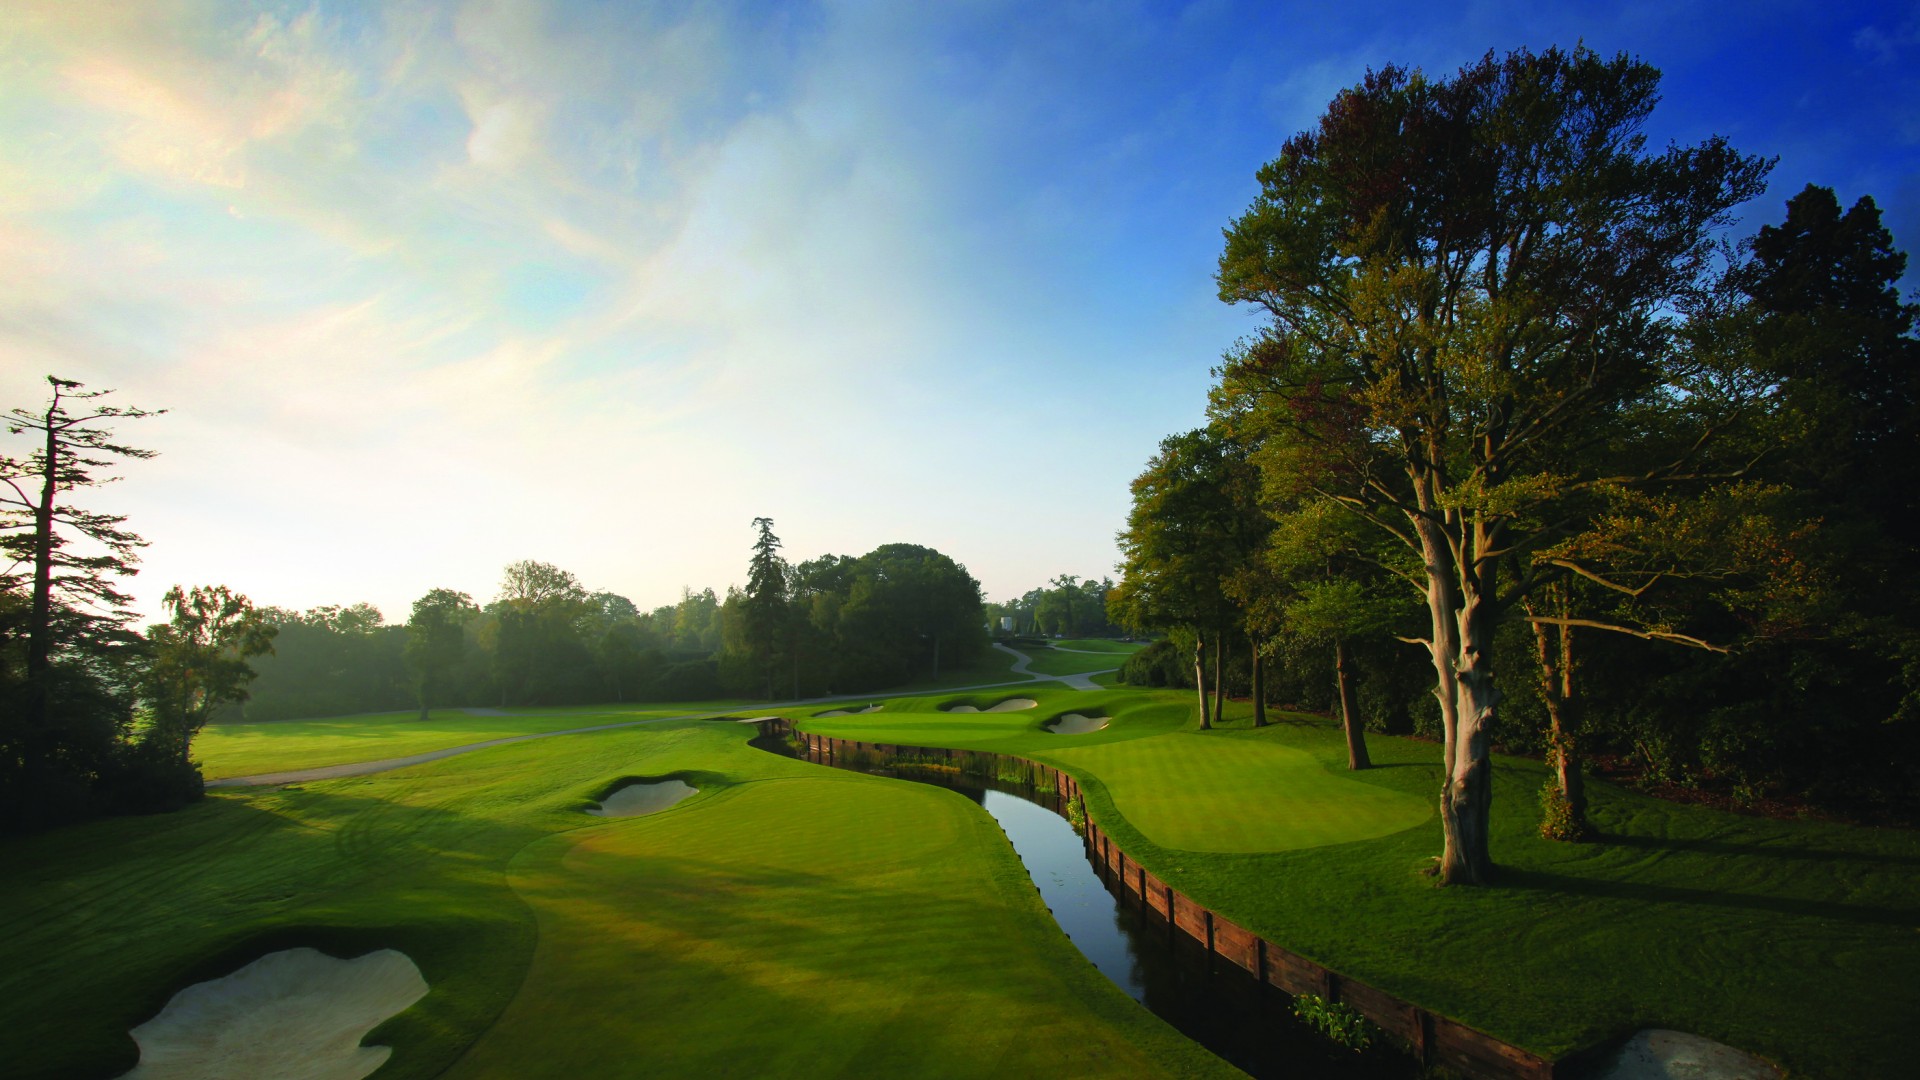 The BMW PGA Championship at Wentworth is a mustsee golf event Square